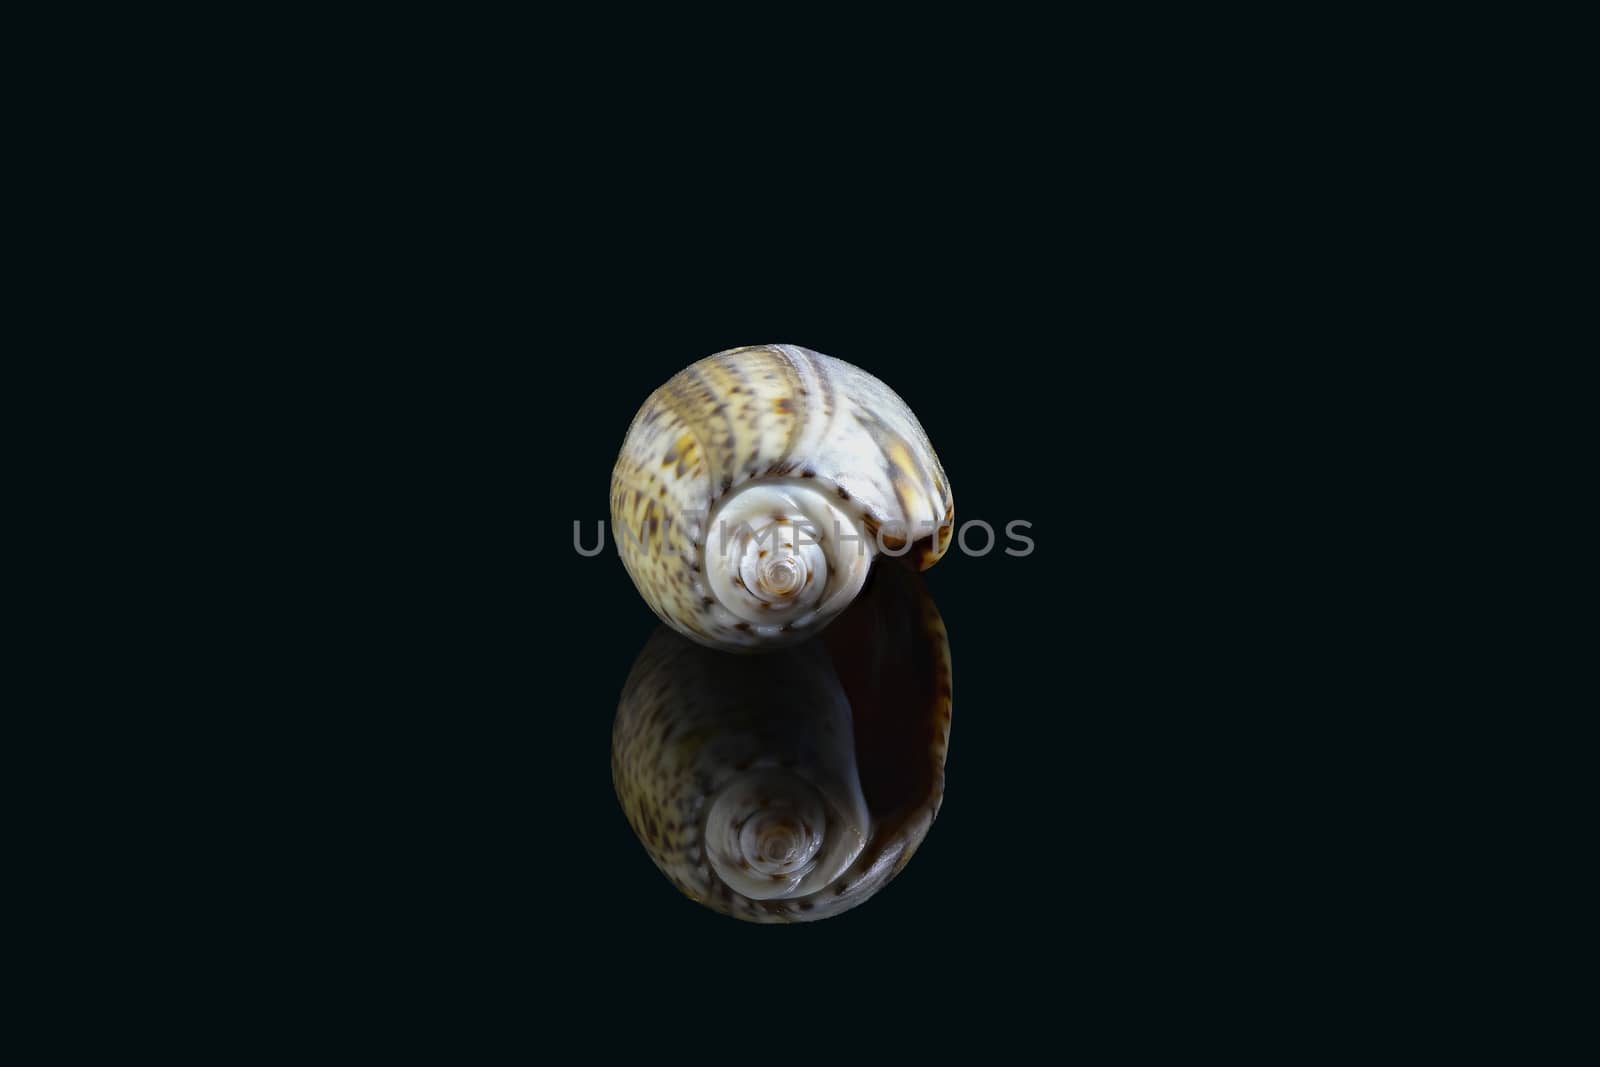 Olive snail (Olividae); A smooth, glossy shell with a large cylindrical whorl and a small conical spire at one end. They come in many colors and are predatory sea snails. Dubai, UAE